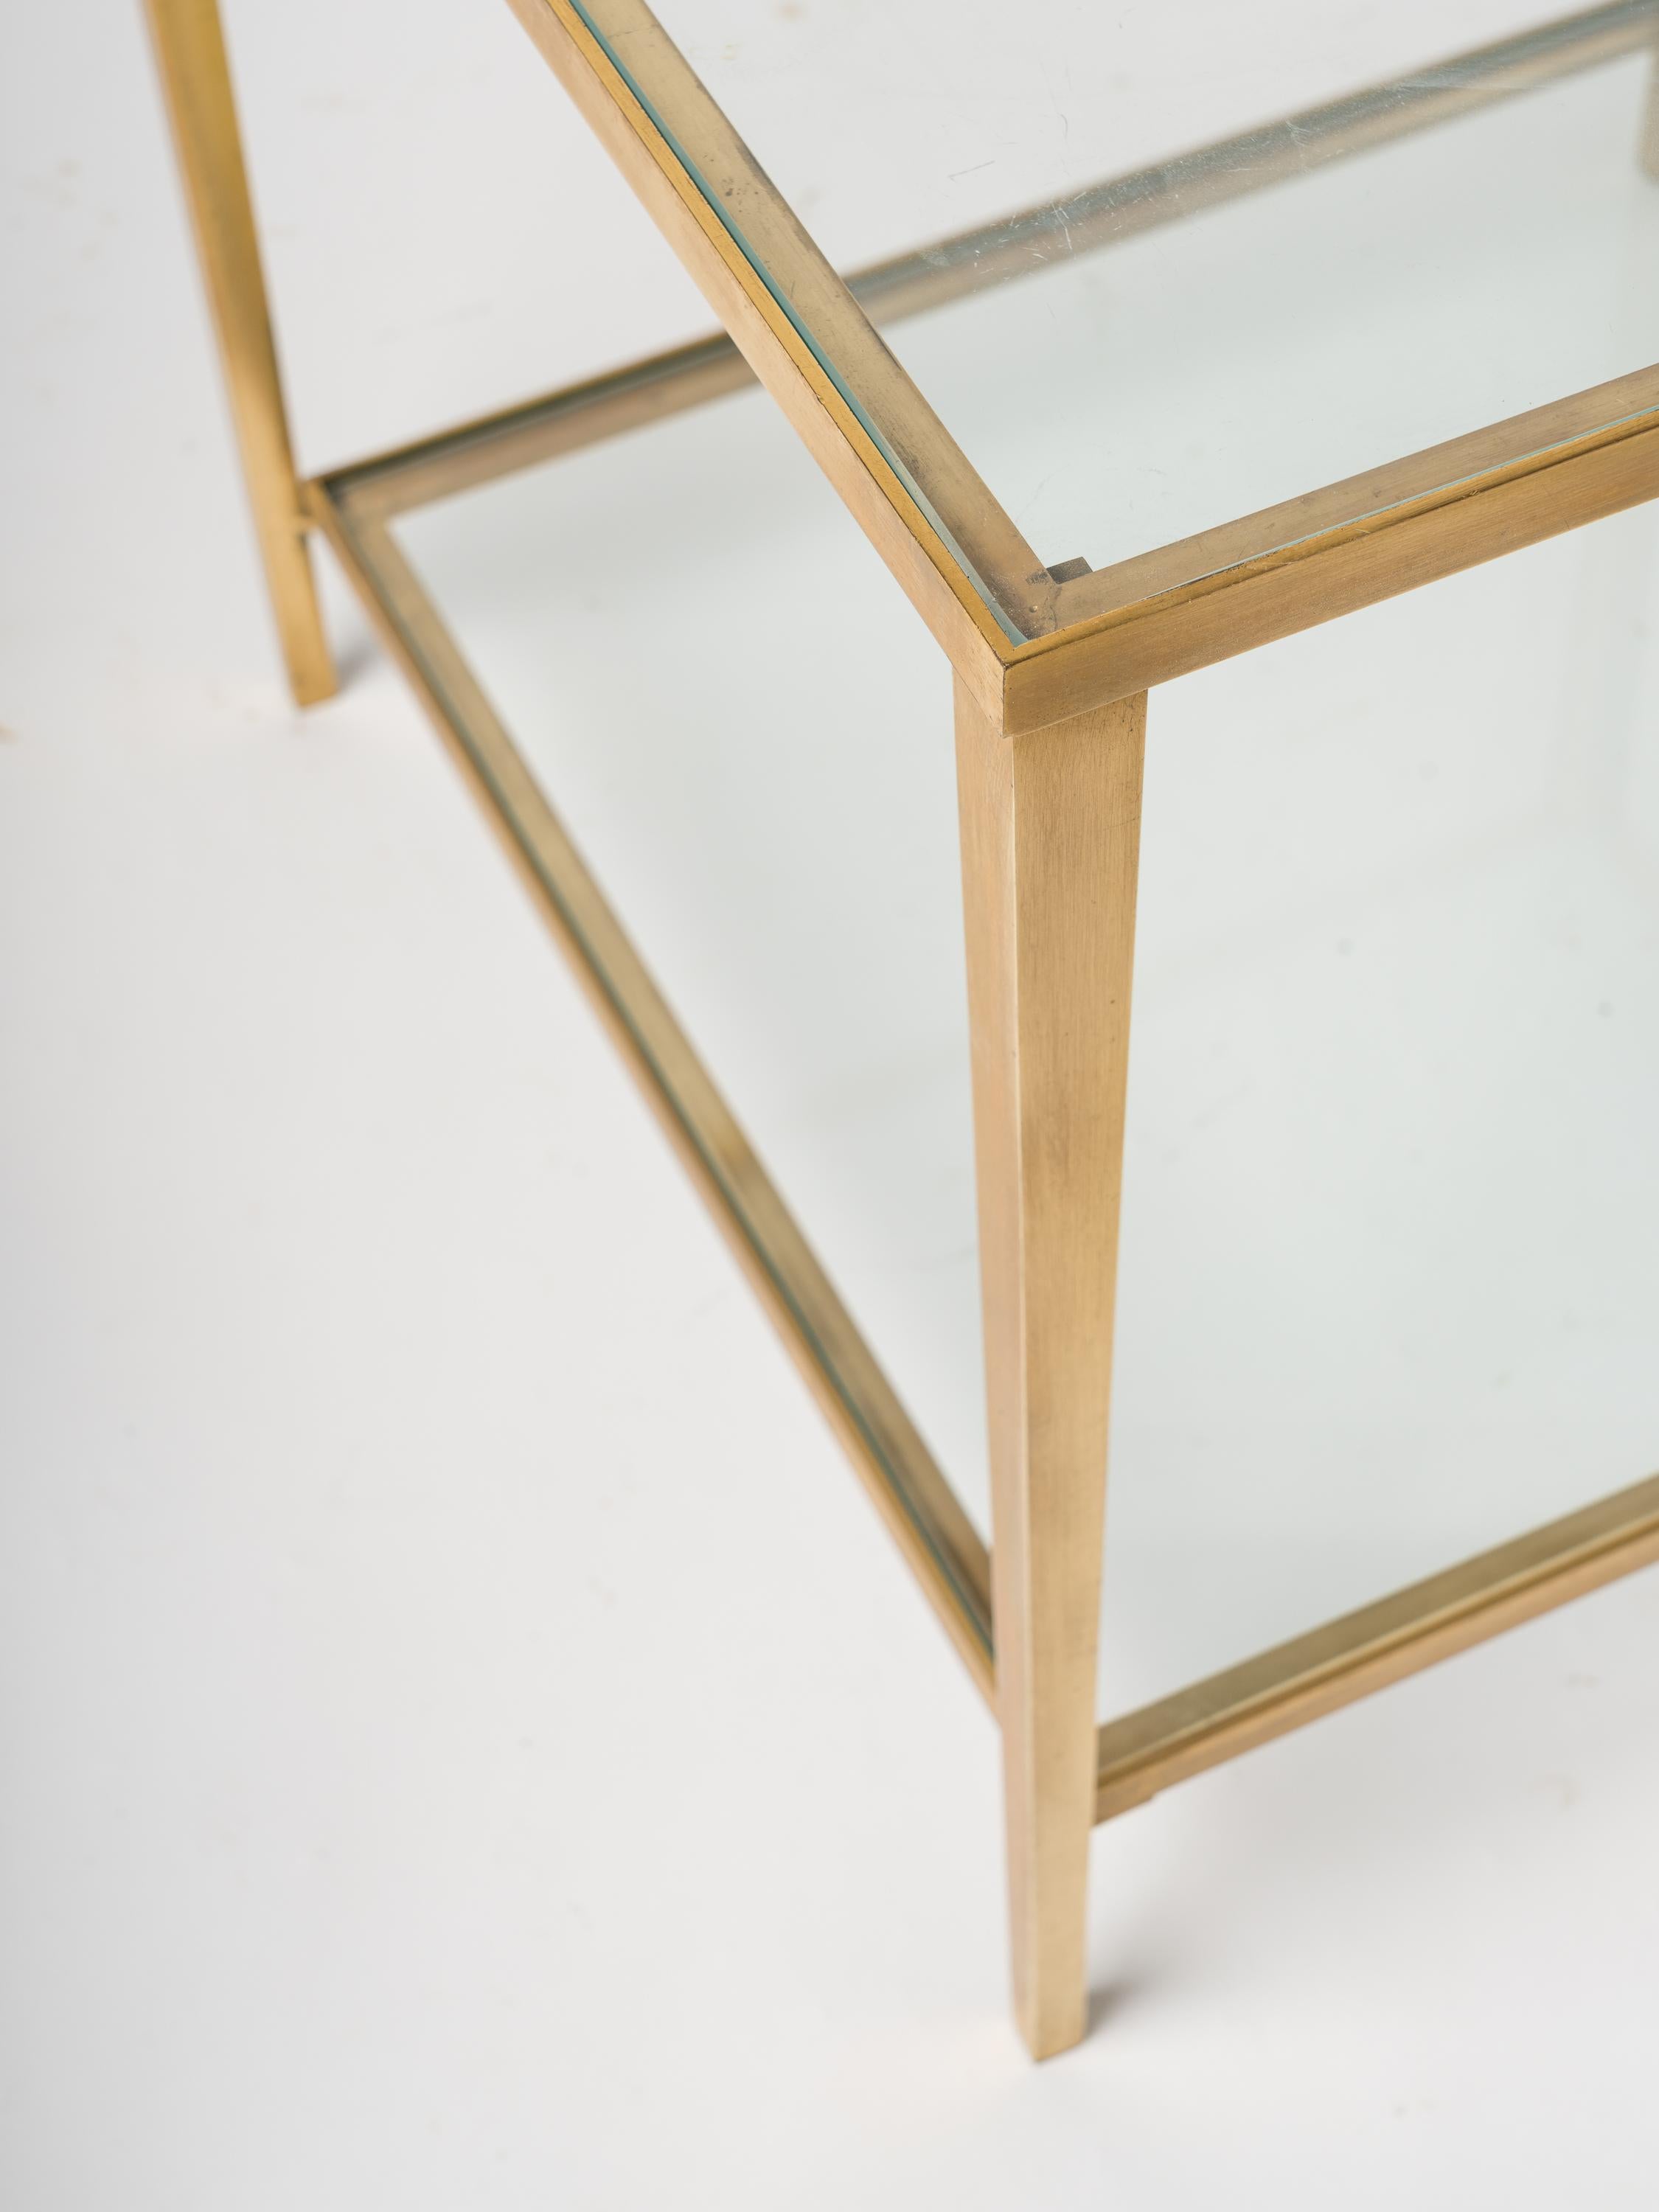 French Petite Brass Table by Maison Jansen in Brass, France 1970s, Ipso Facto For Sale